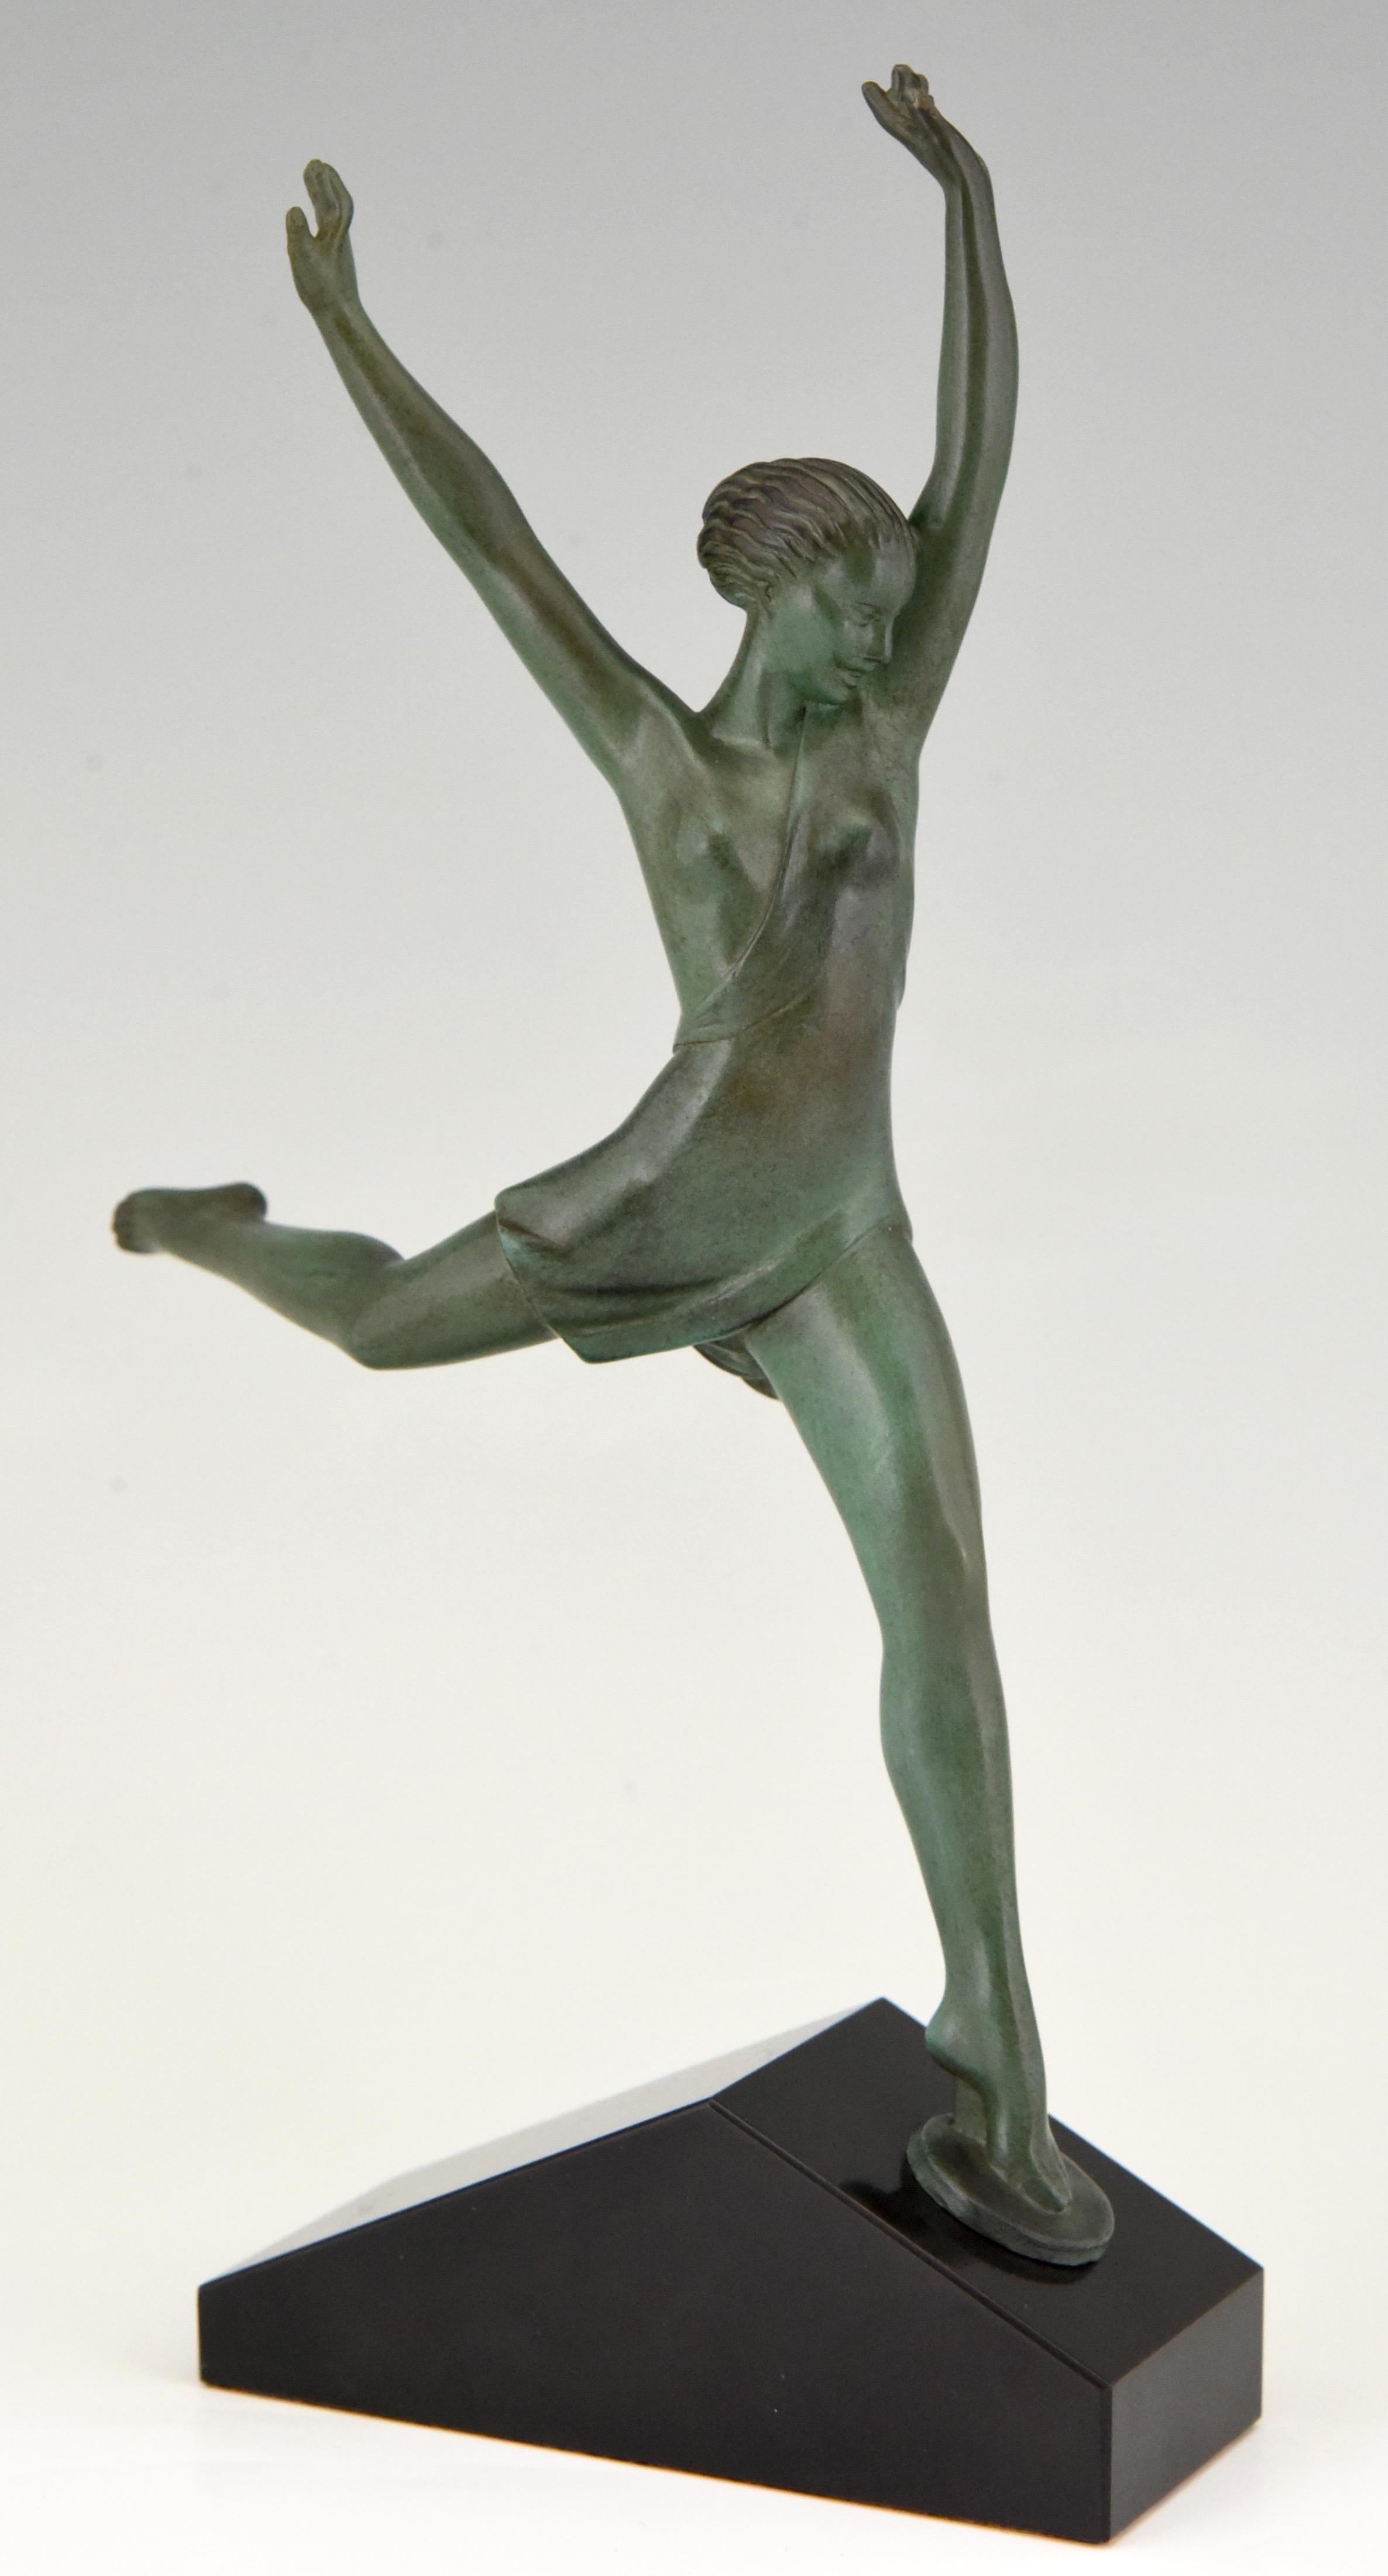 Olypme, elegant Art Deco sculpture of a running girl by Fayral, pseudonym of Pierre le Faguays cast by the Max le Verrier foundry. Green patinated Art Metal on a Belgian Black marble base, France 1930. 
Literature:
“Bronzes, sculptors and